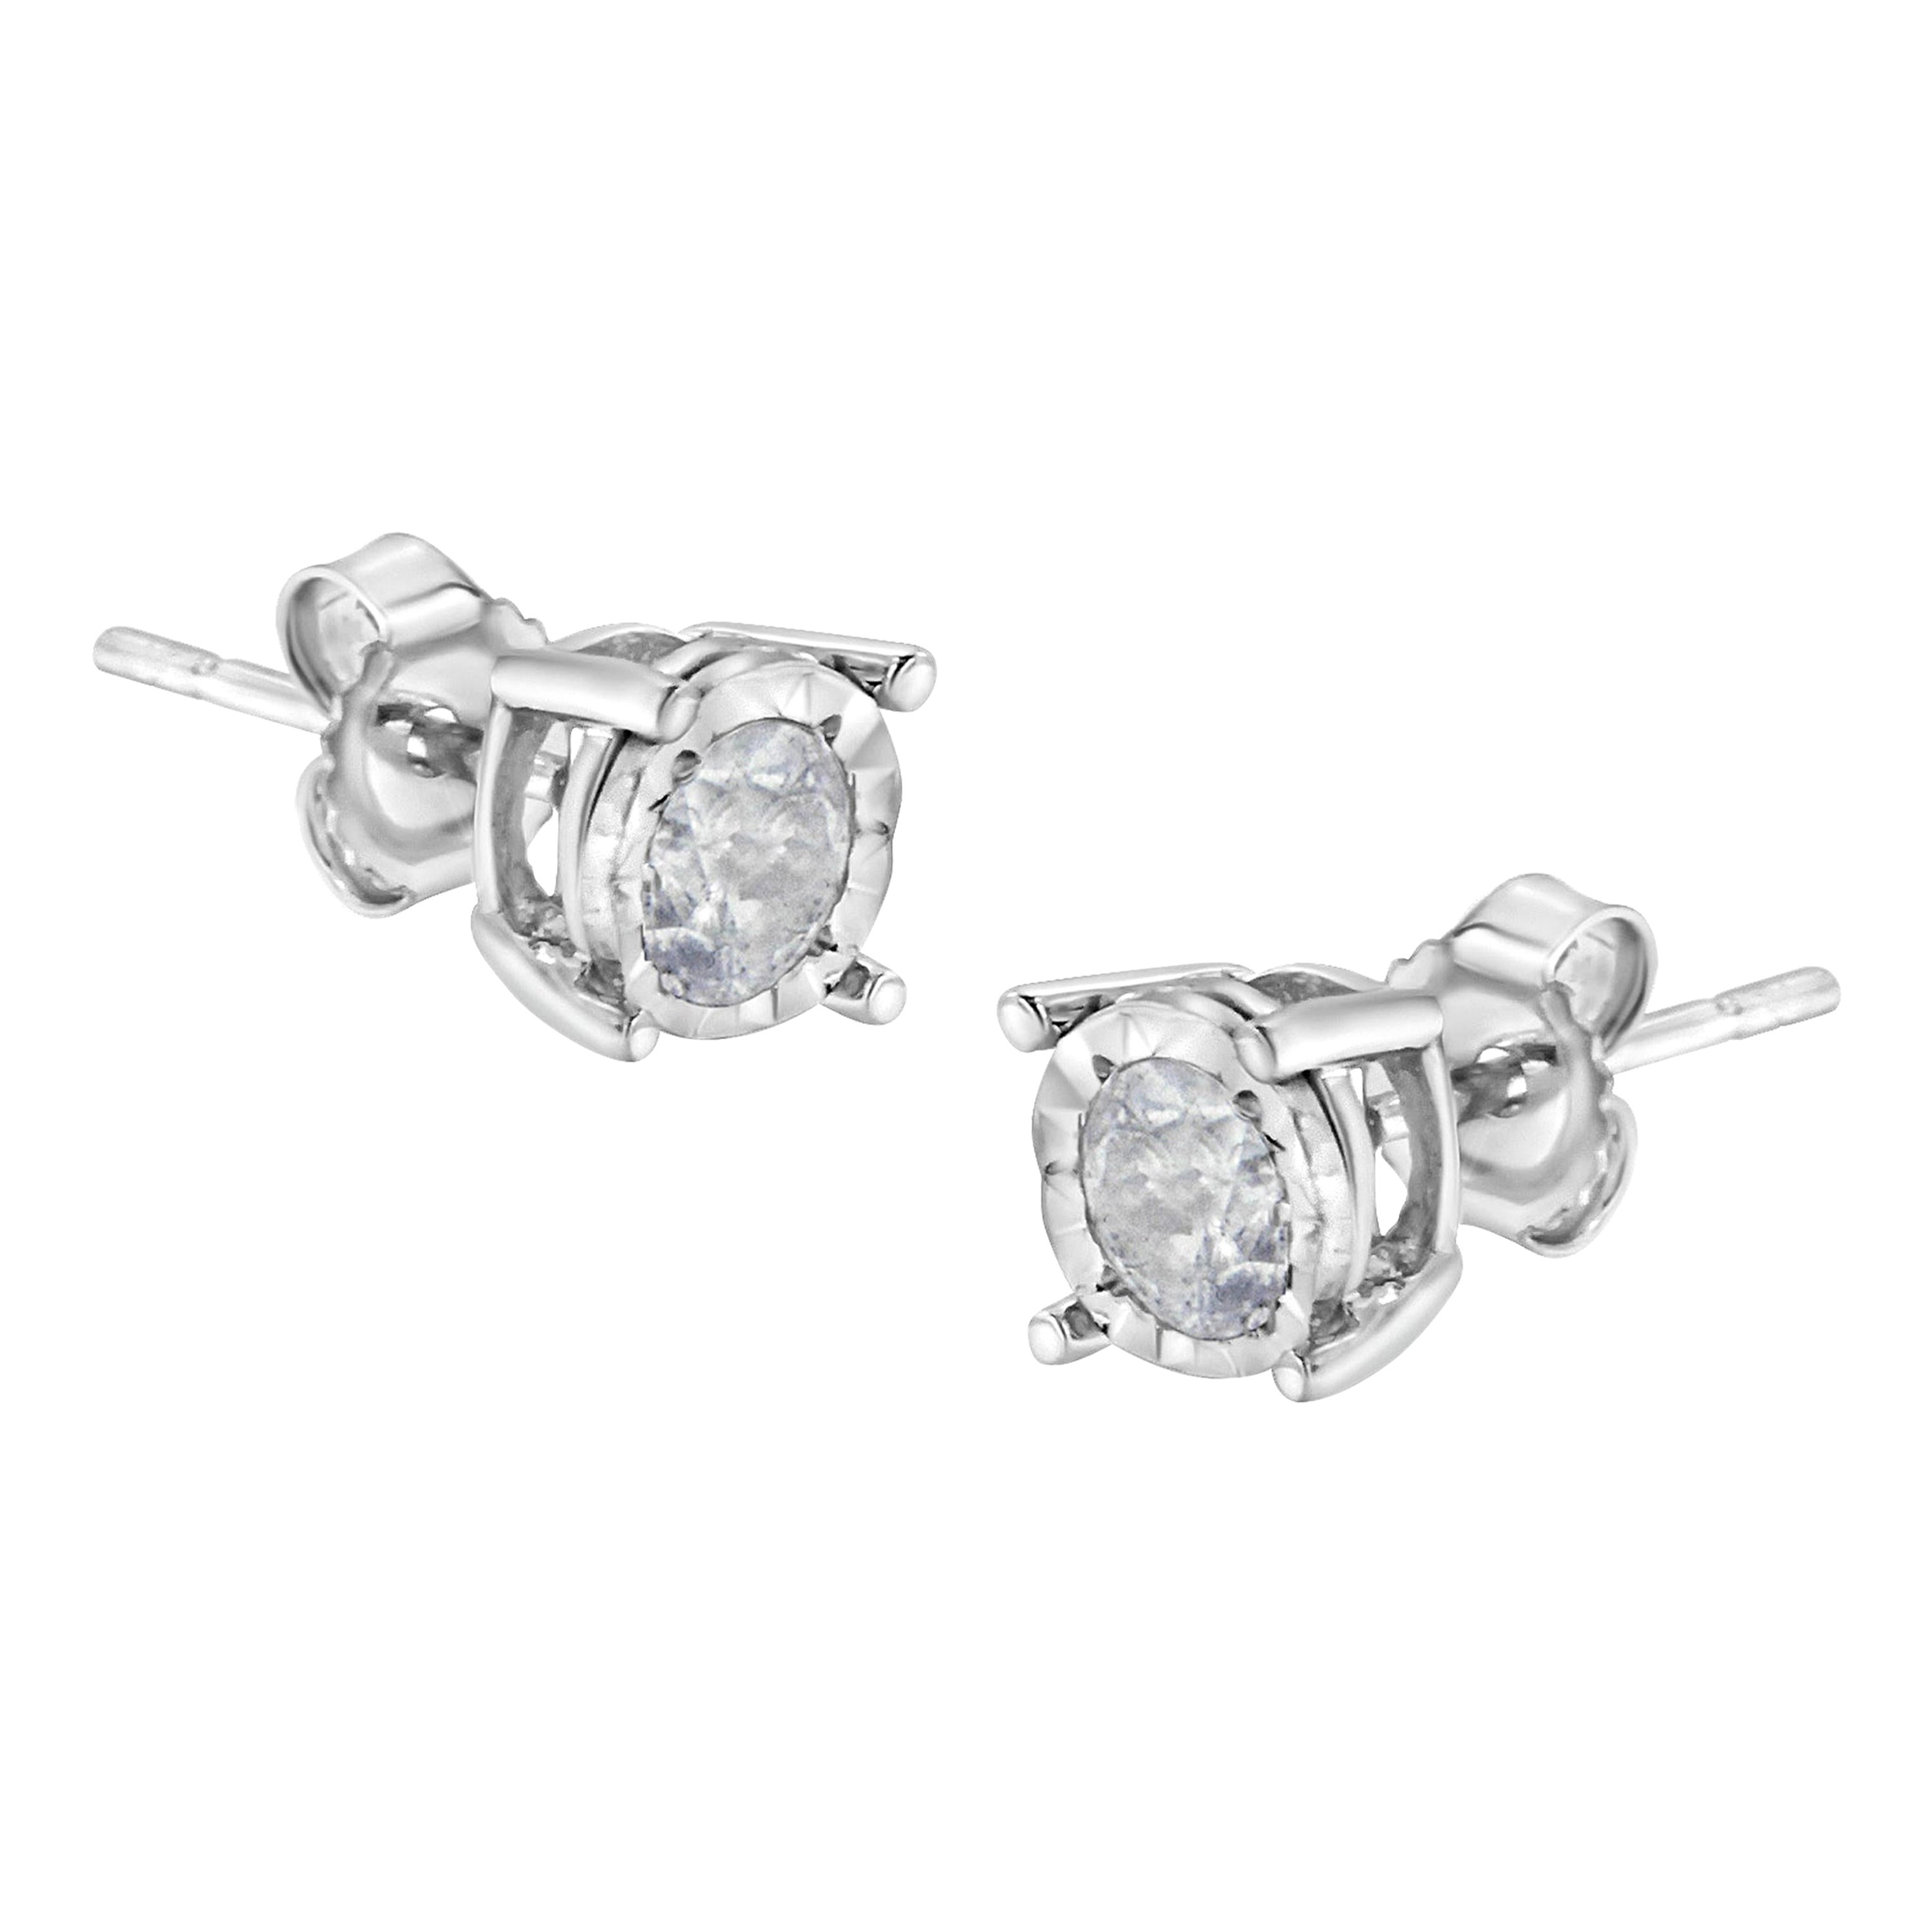 .925 Sterling Silver 1/2 Carat Brilliant Solitaire Diamond Stud Earrings For Sale